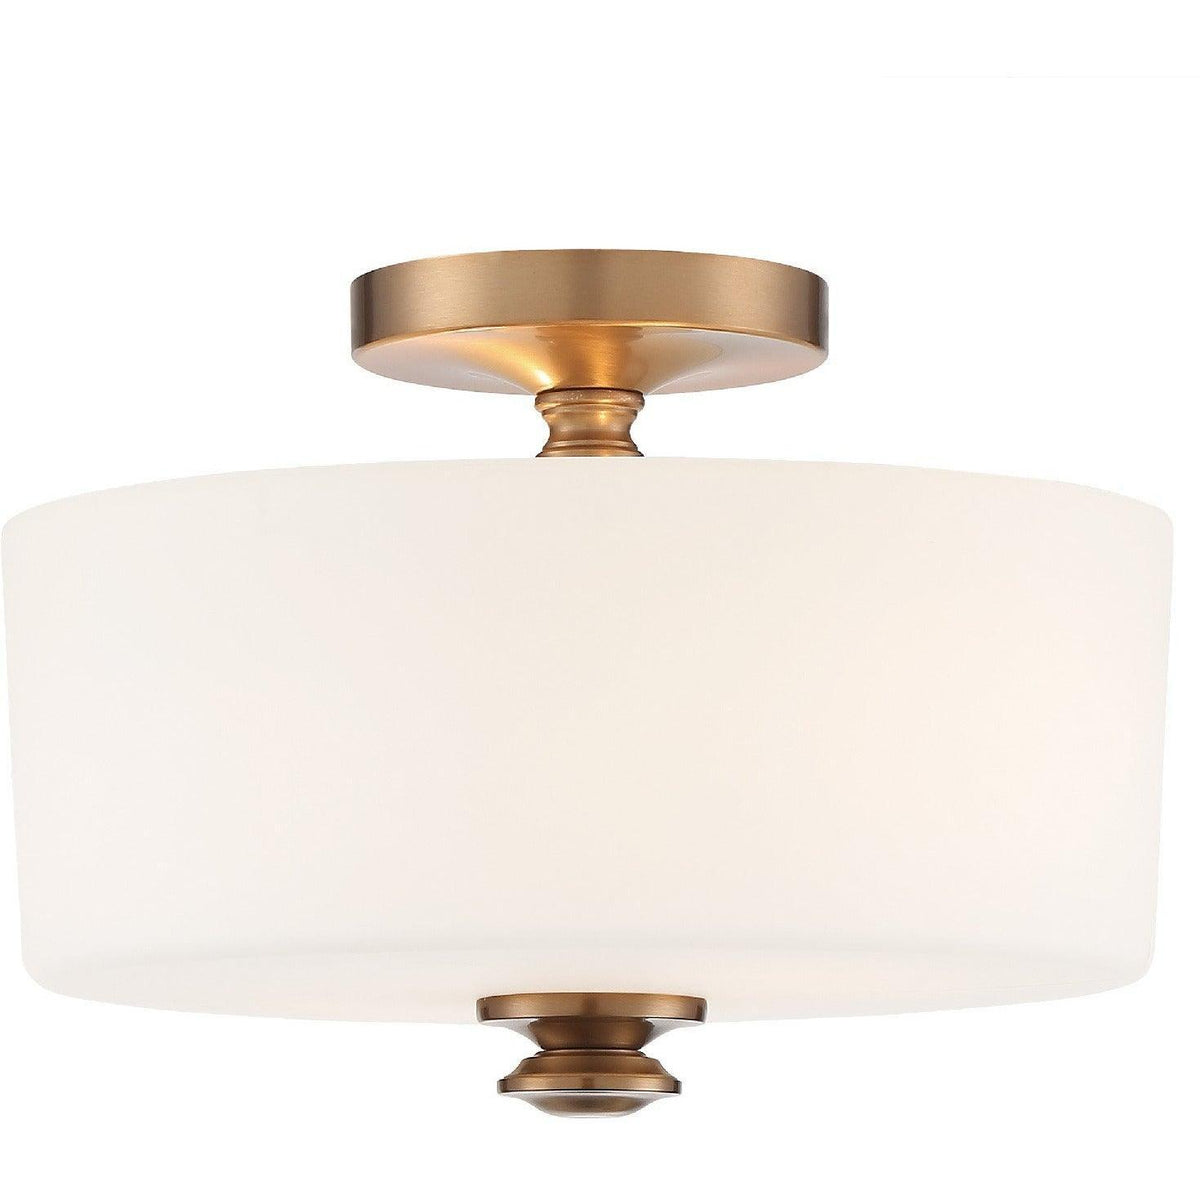 Crystorama - Travis Two Light Ceiling Mount - TRA-A3302-VG | Montreal Lighting & Hardware